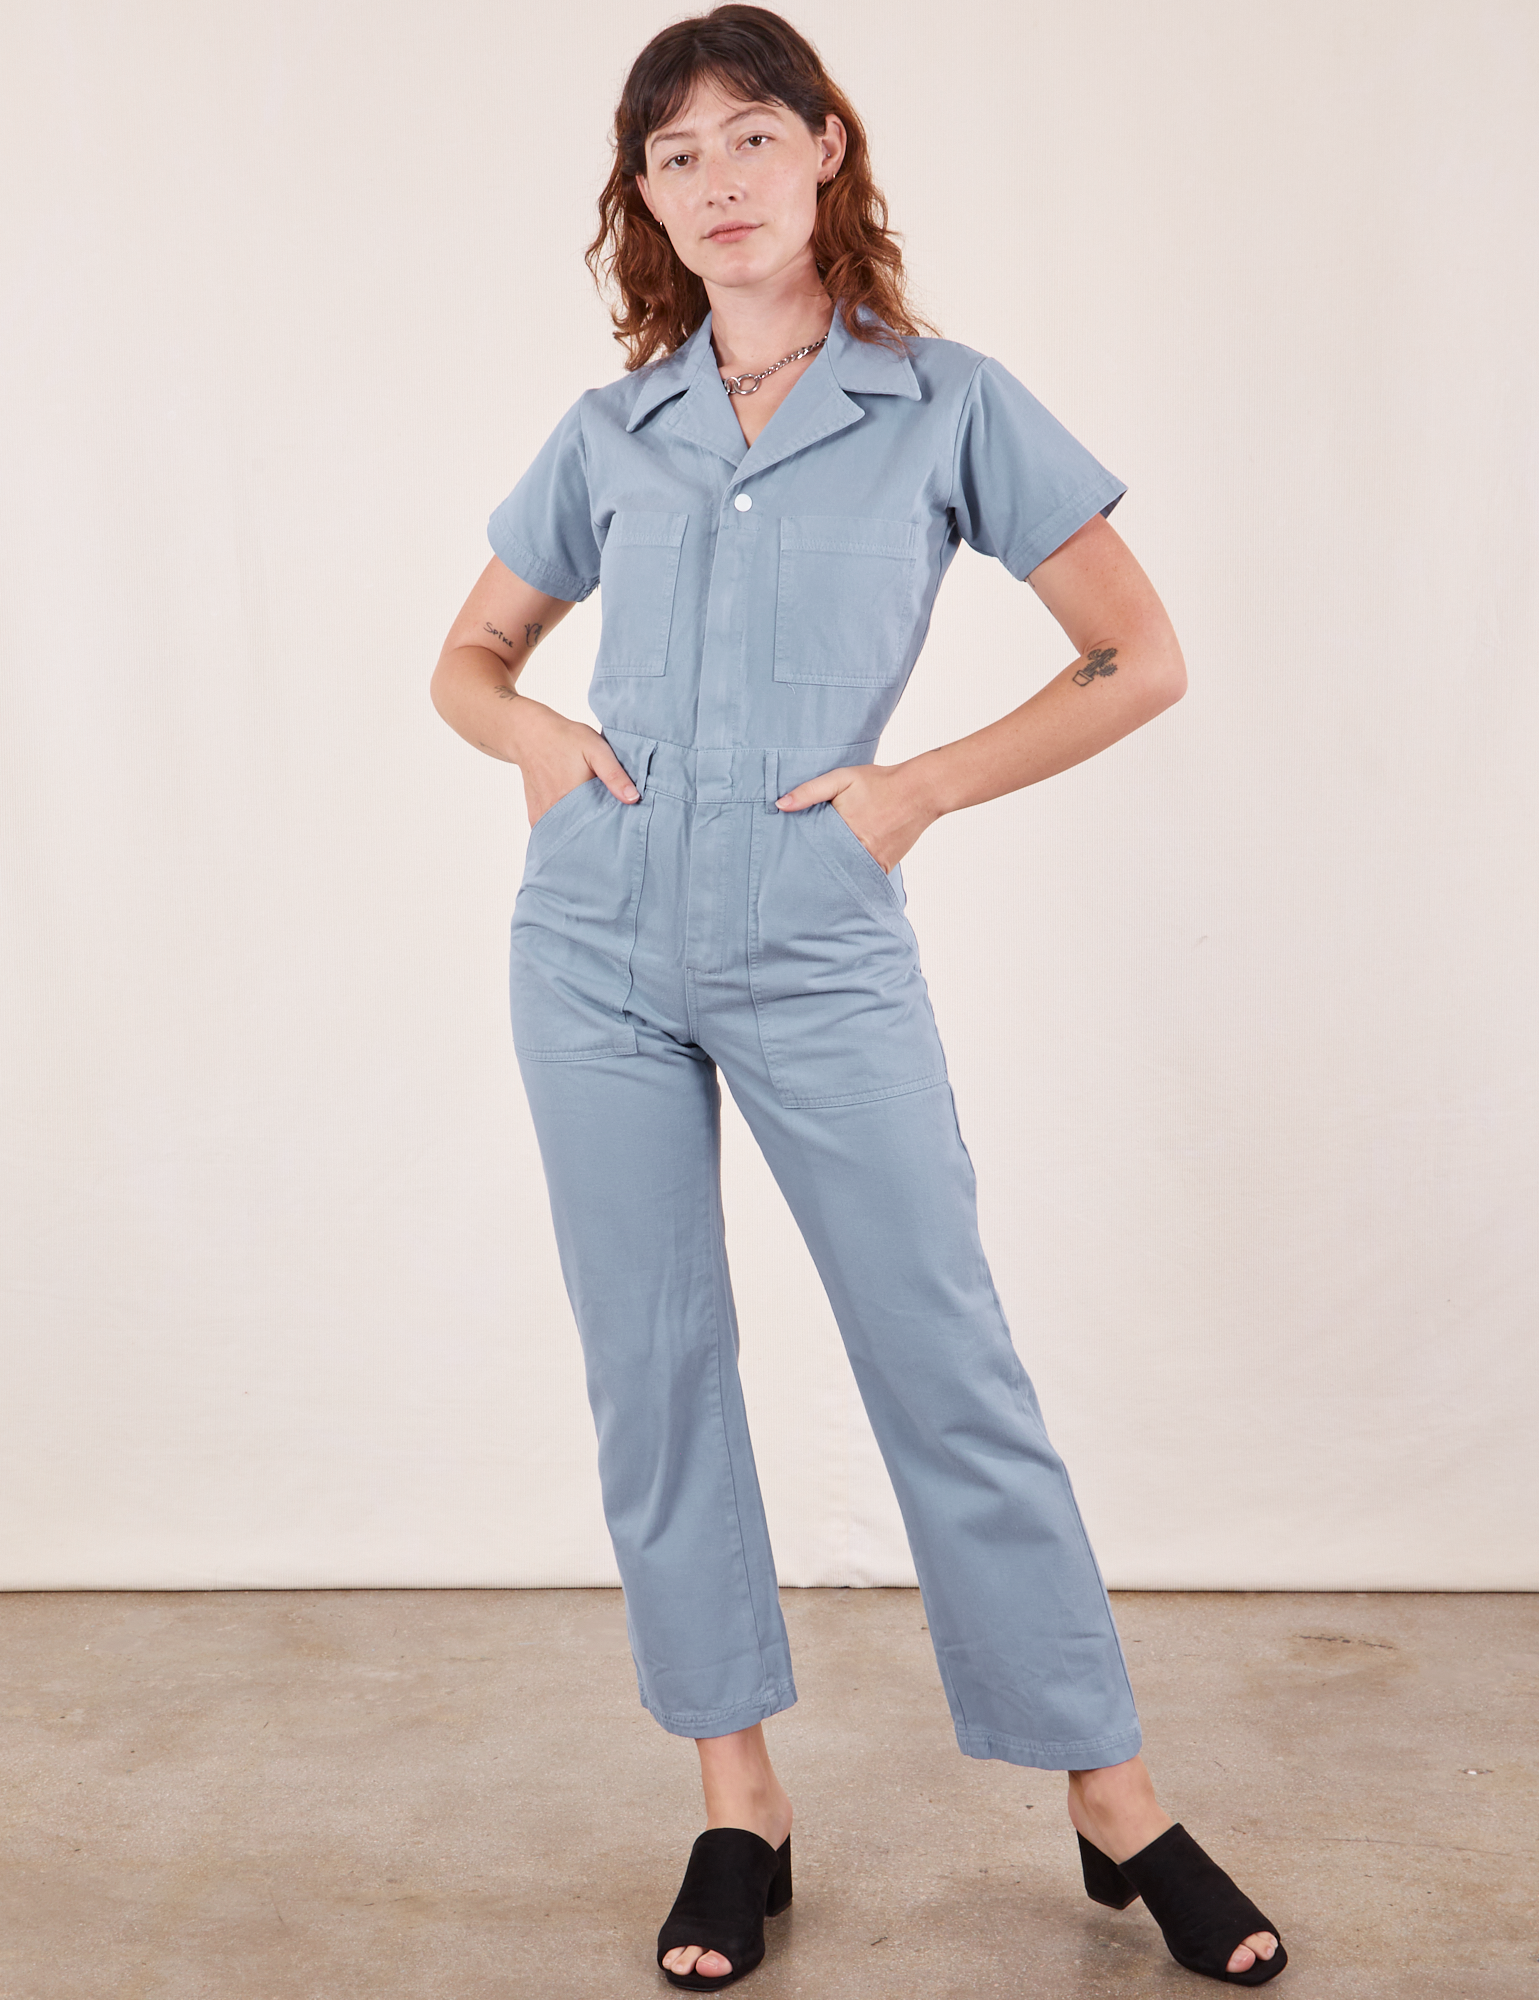 Alex is 5&#39;8&quot; and wearing XS Short Sleeve Jumpsuit in Periwinkle